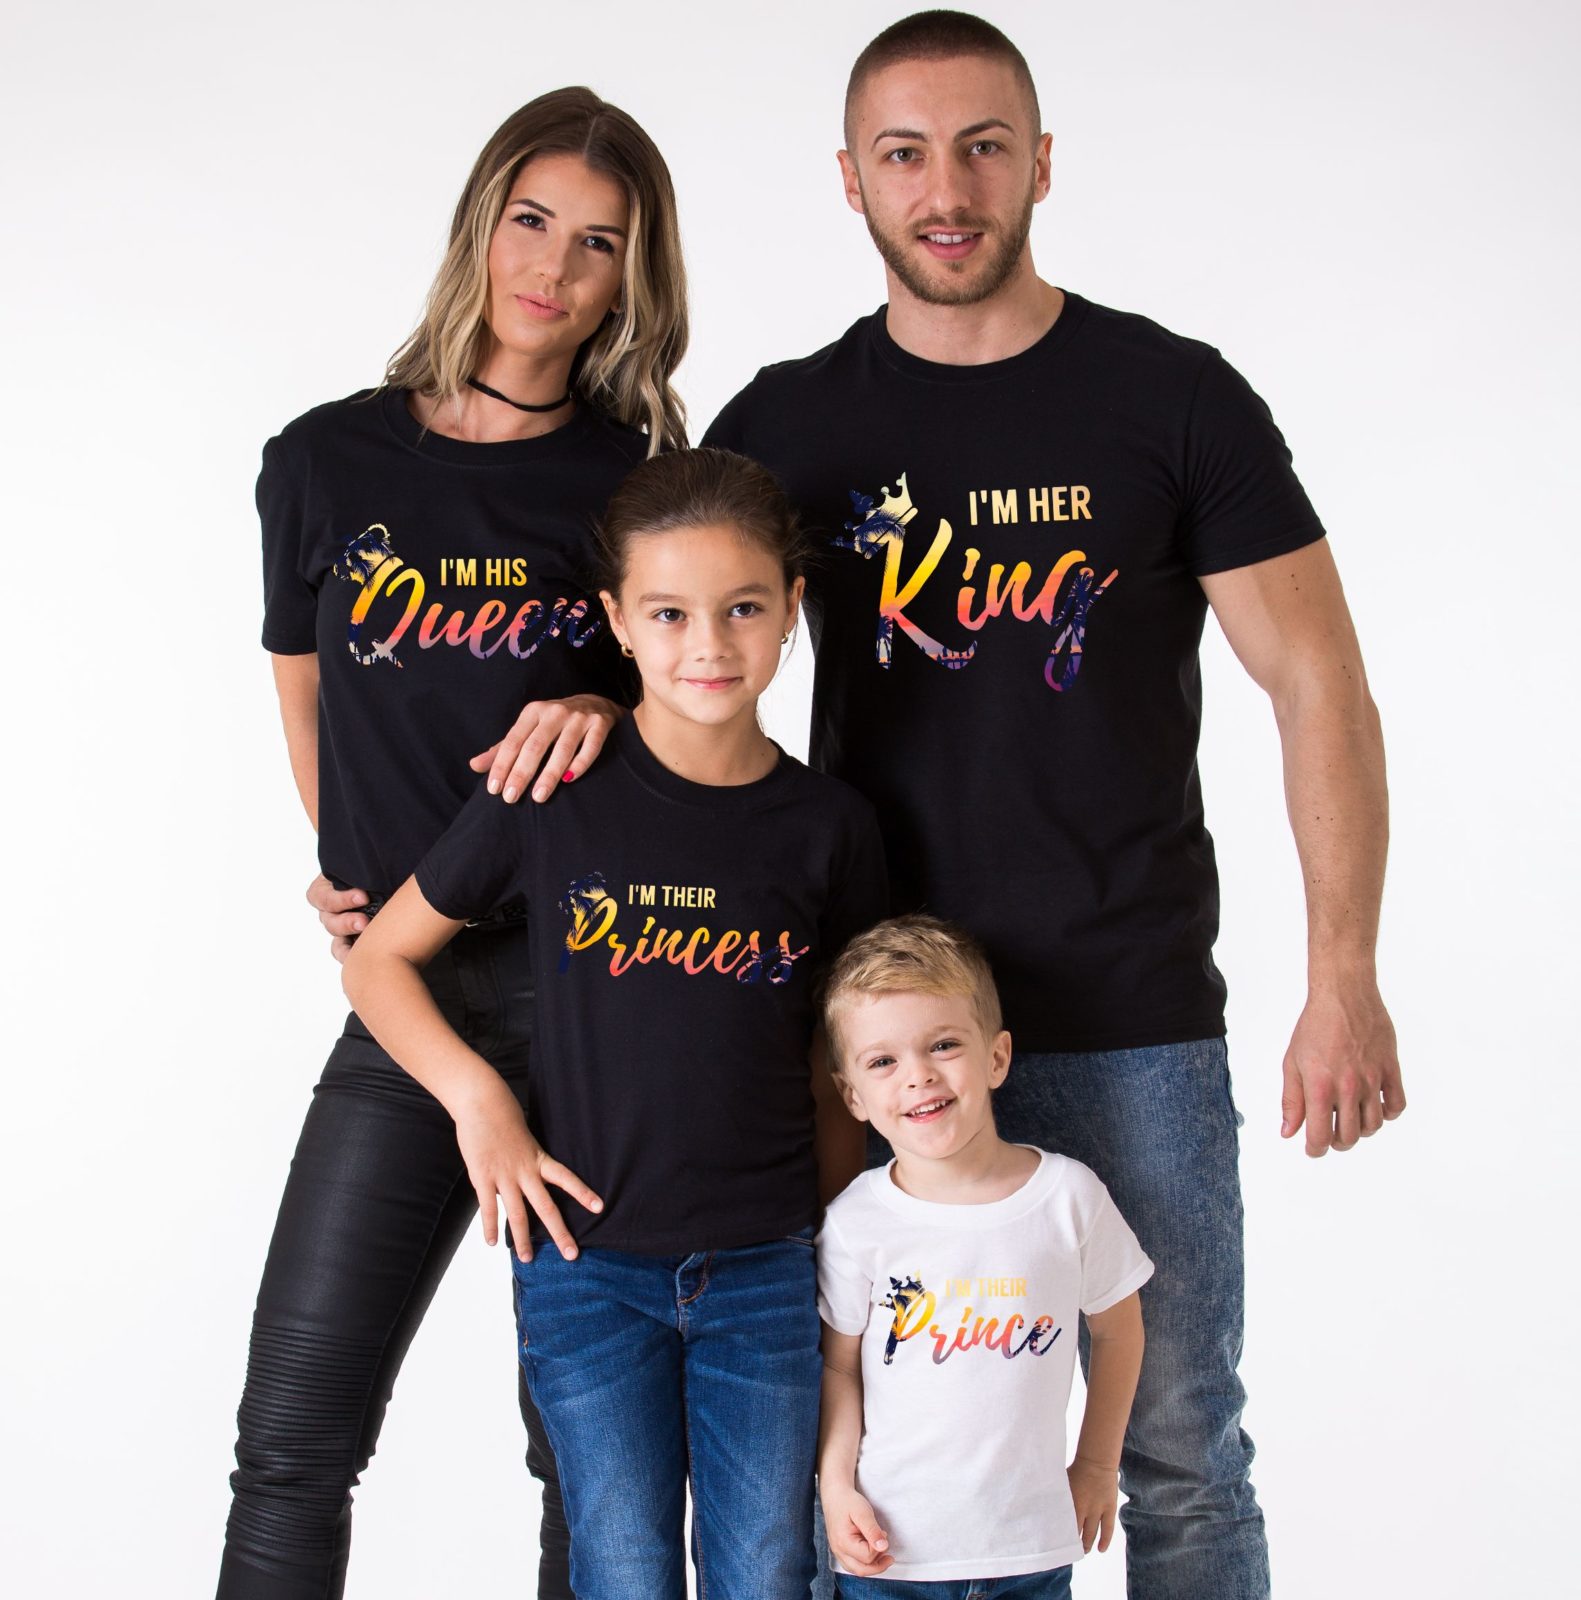 Family Vacation Shirts, Her King, His Queen, Their Prince, Princess